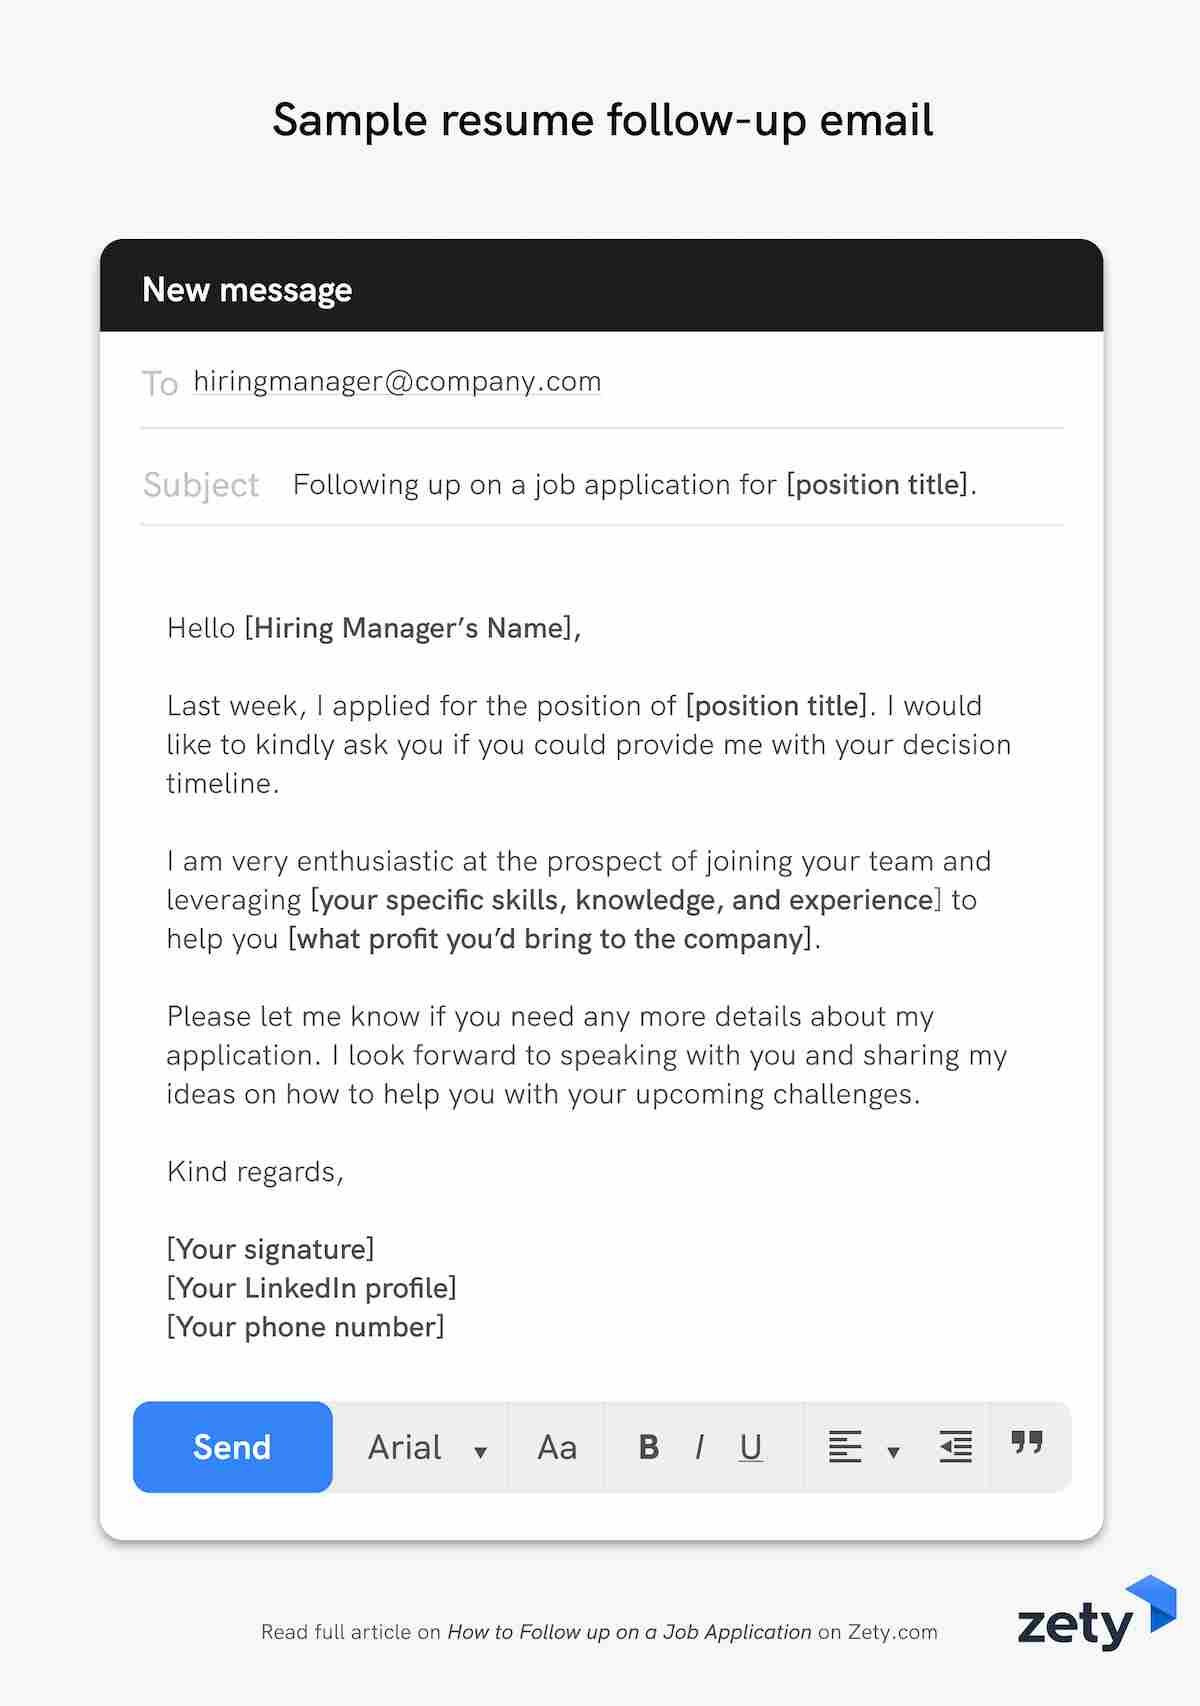 Email to Send Resume for Job Sample How to Follow Up On A Job Application (with Email Sample)